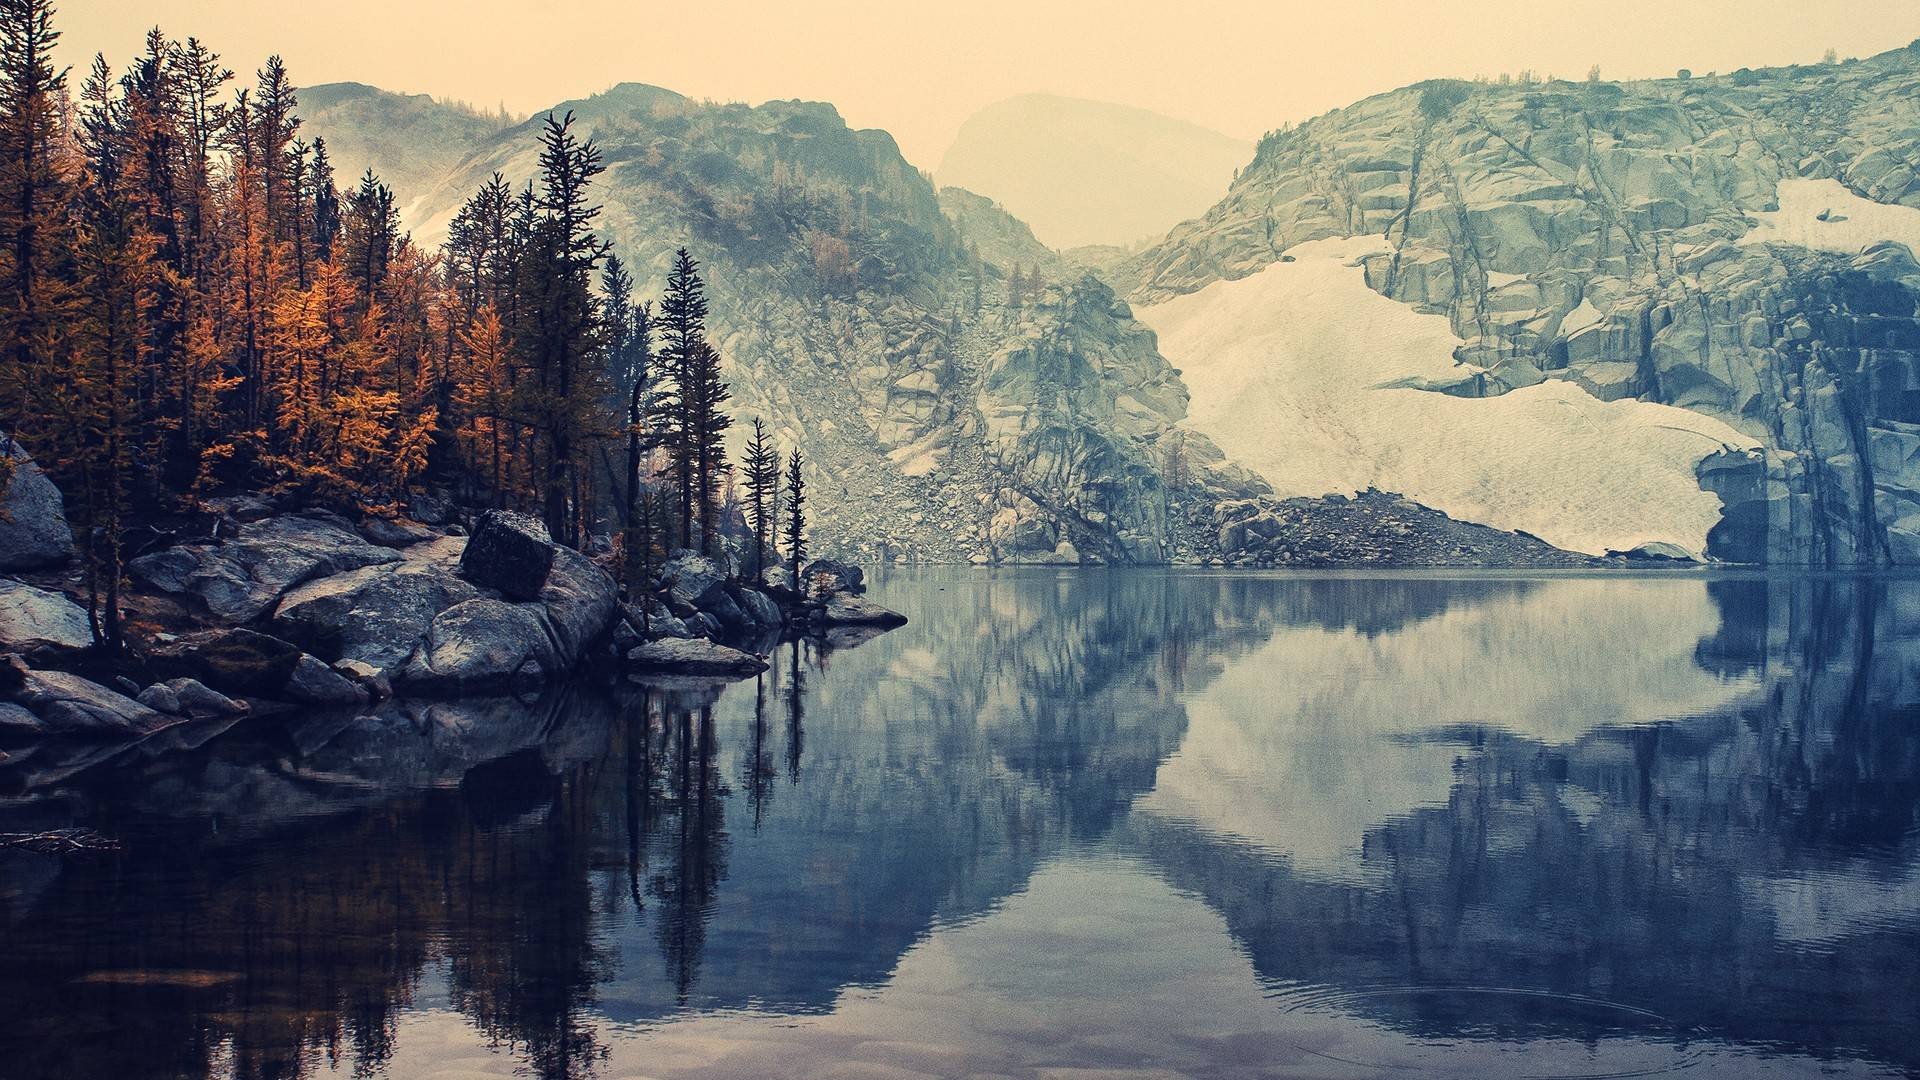 General 1920x1080 lake mountains nature landscape winter trees fall river snow reflection rocks water